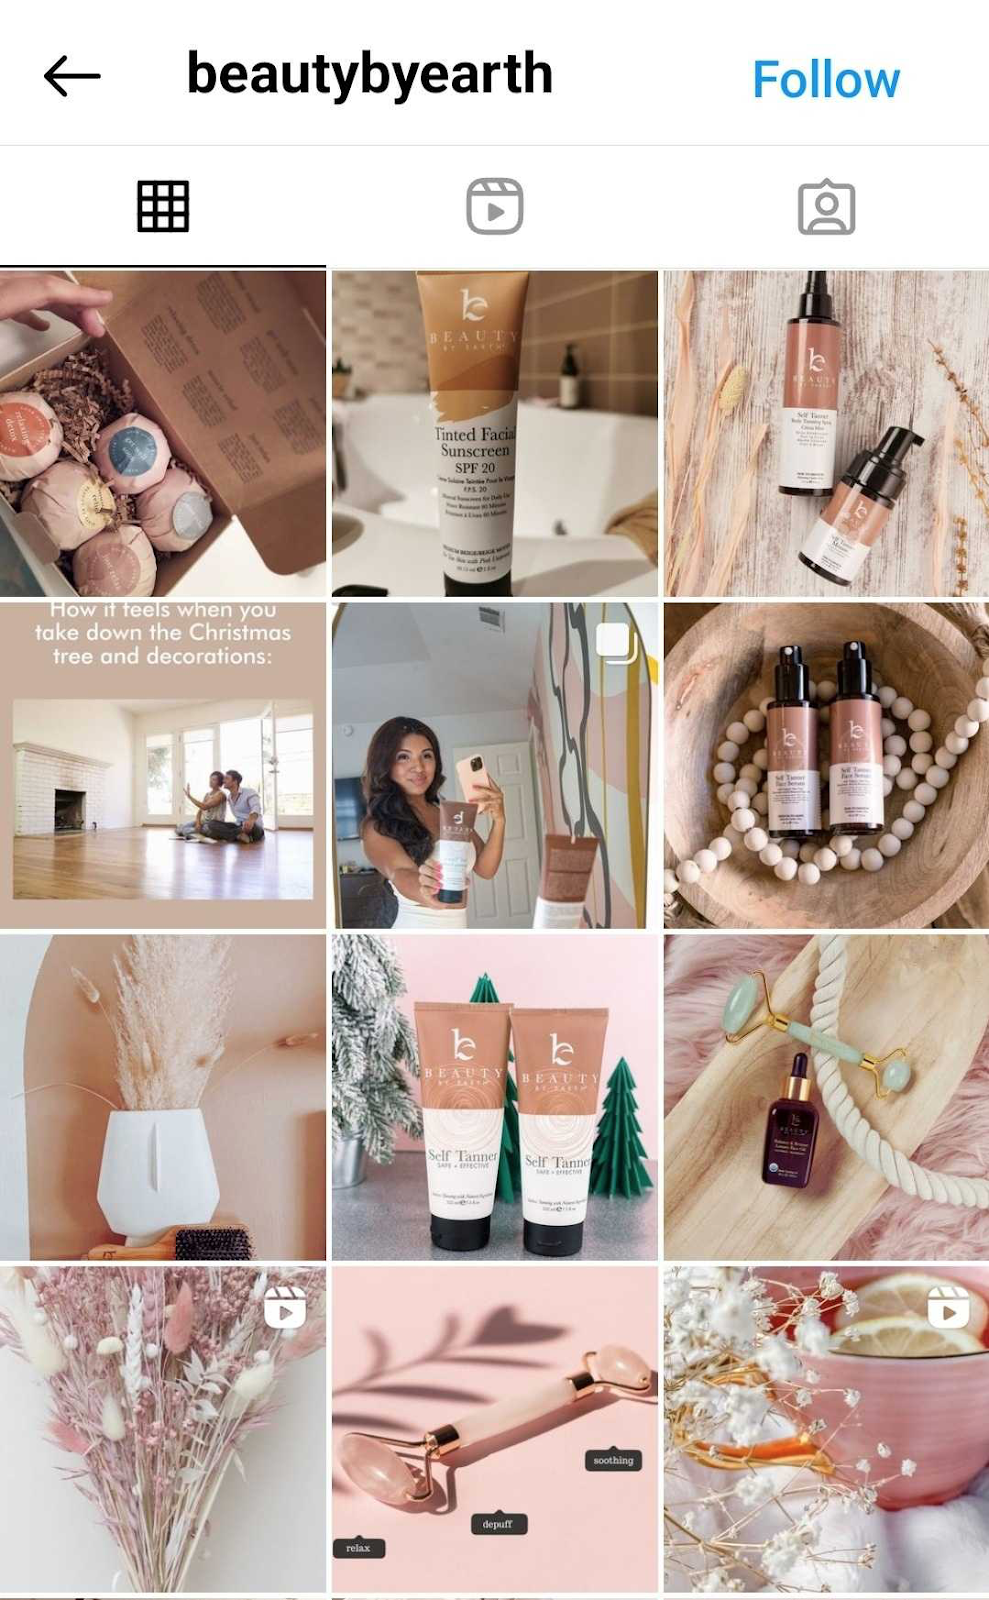 Instagram feed of skincare company Beauty By Earth showing their products.